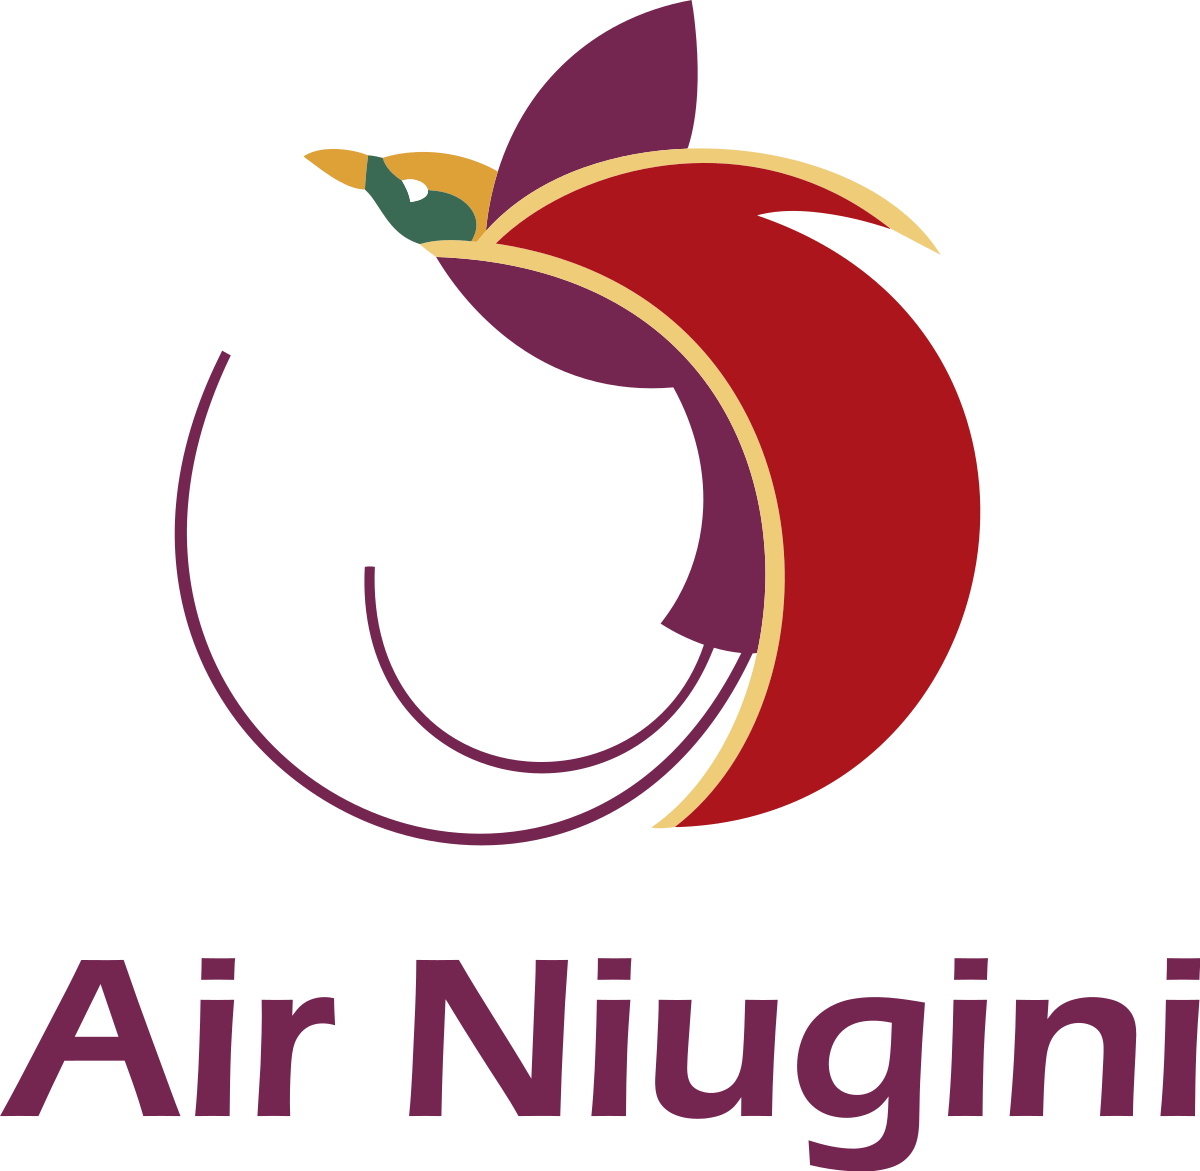 National airline logo of Papua New Guinea.